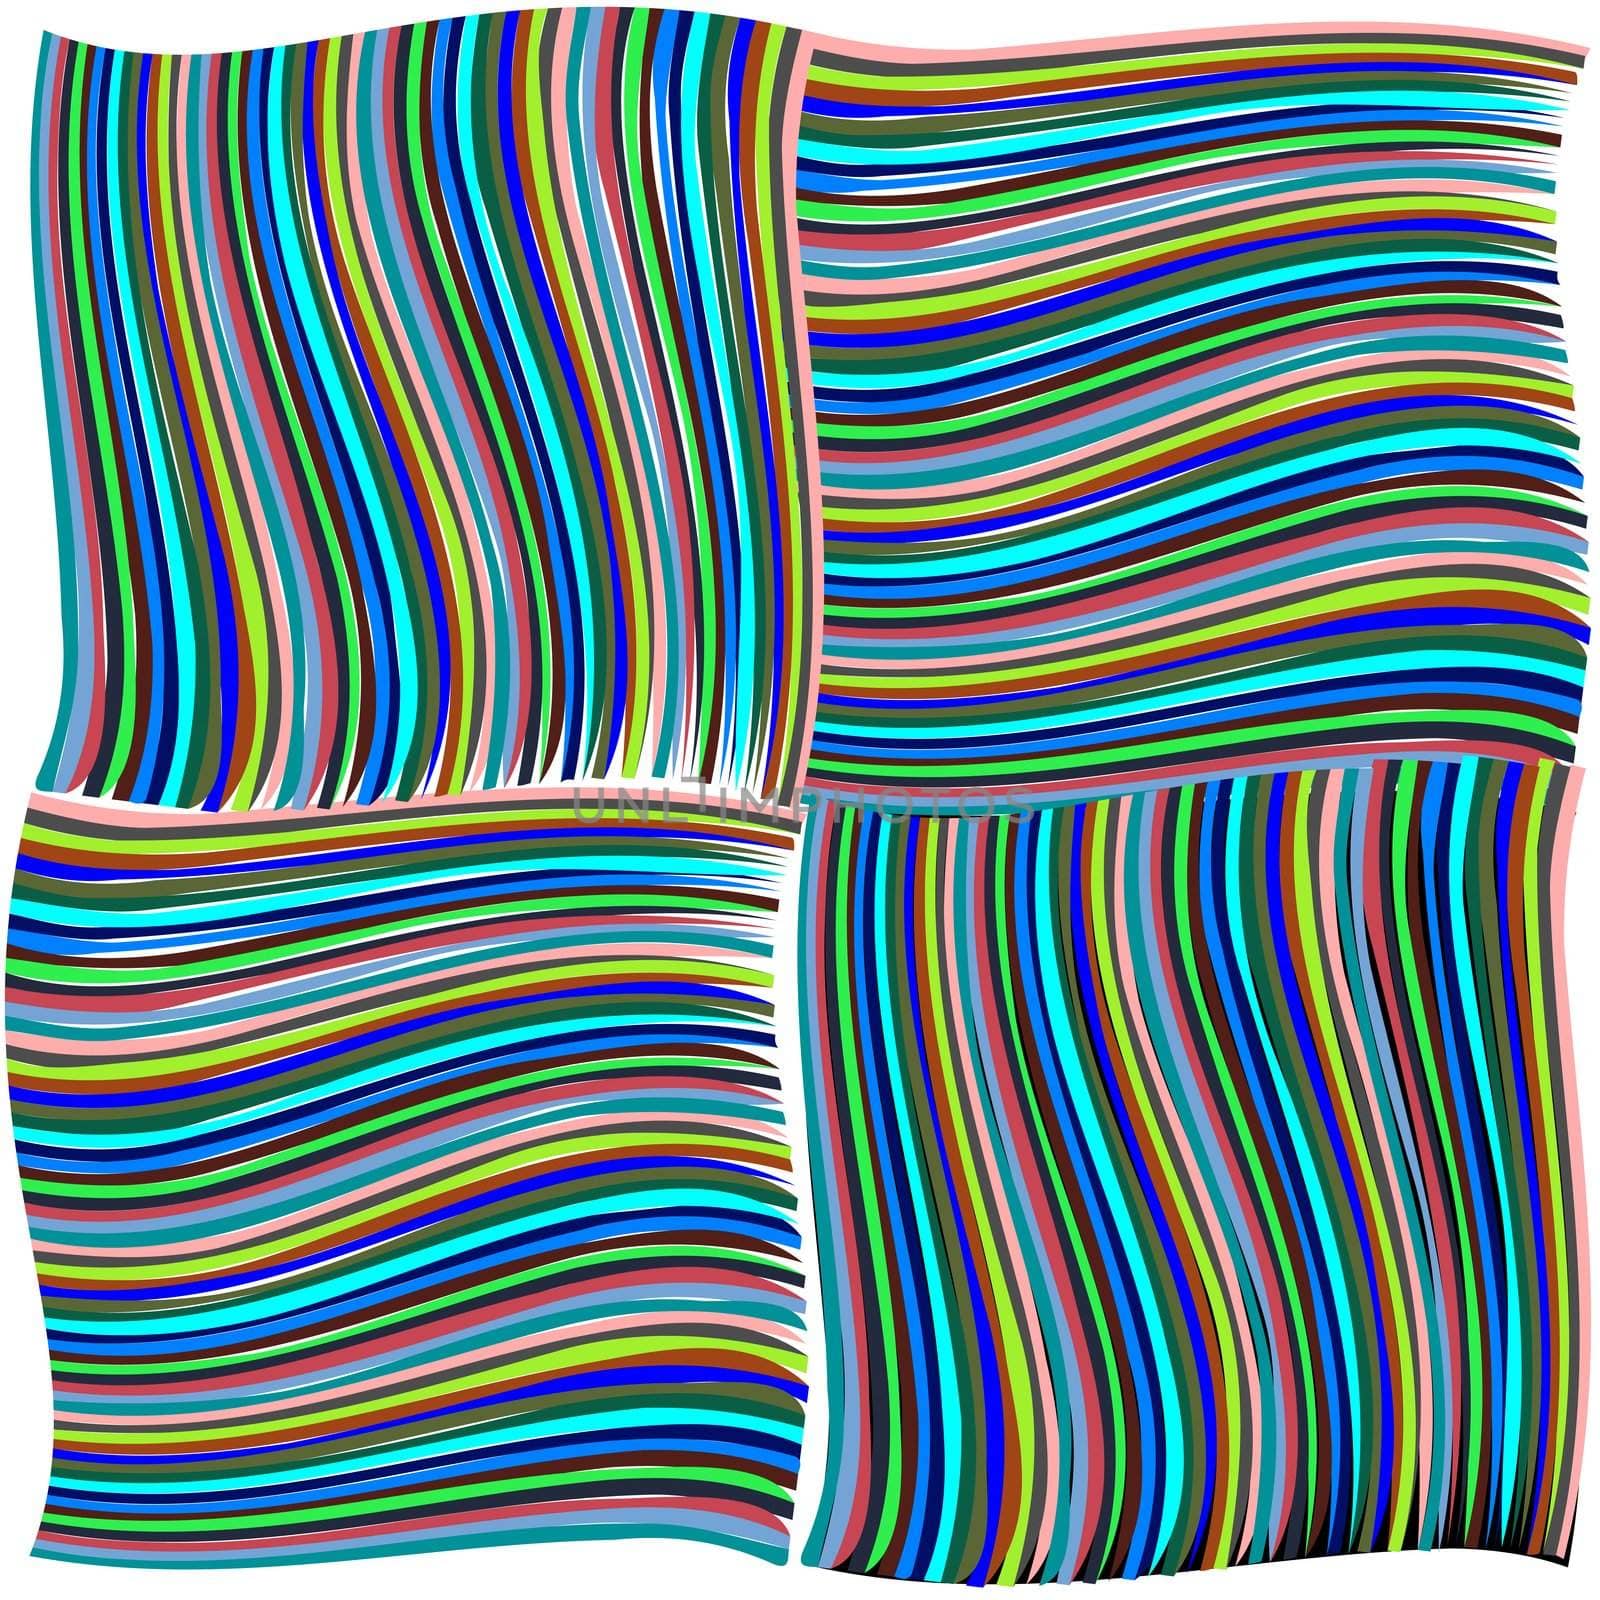 green and blue twisted stripes texture, abstract; vector art illustration